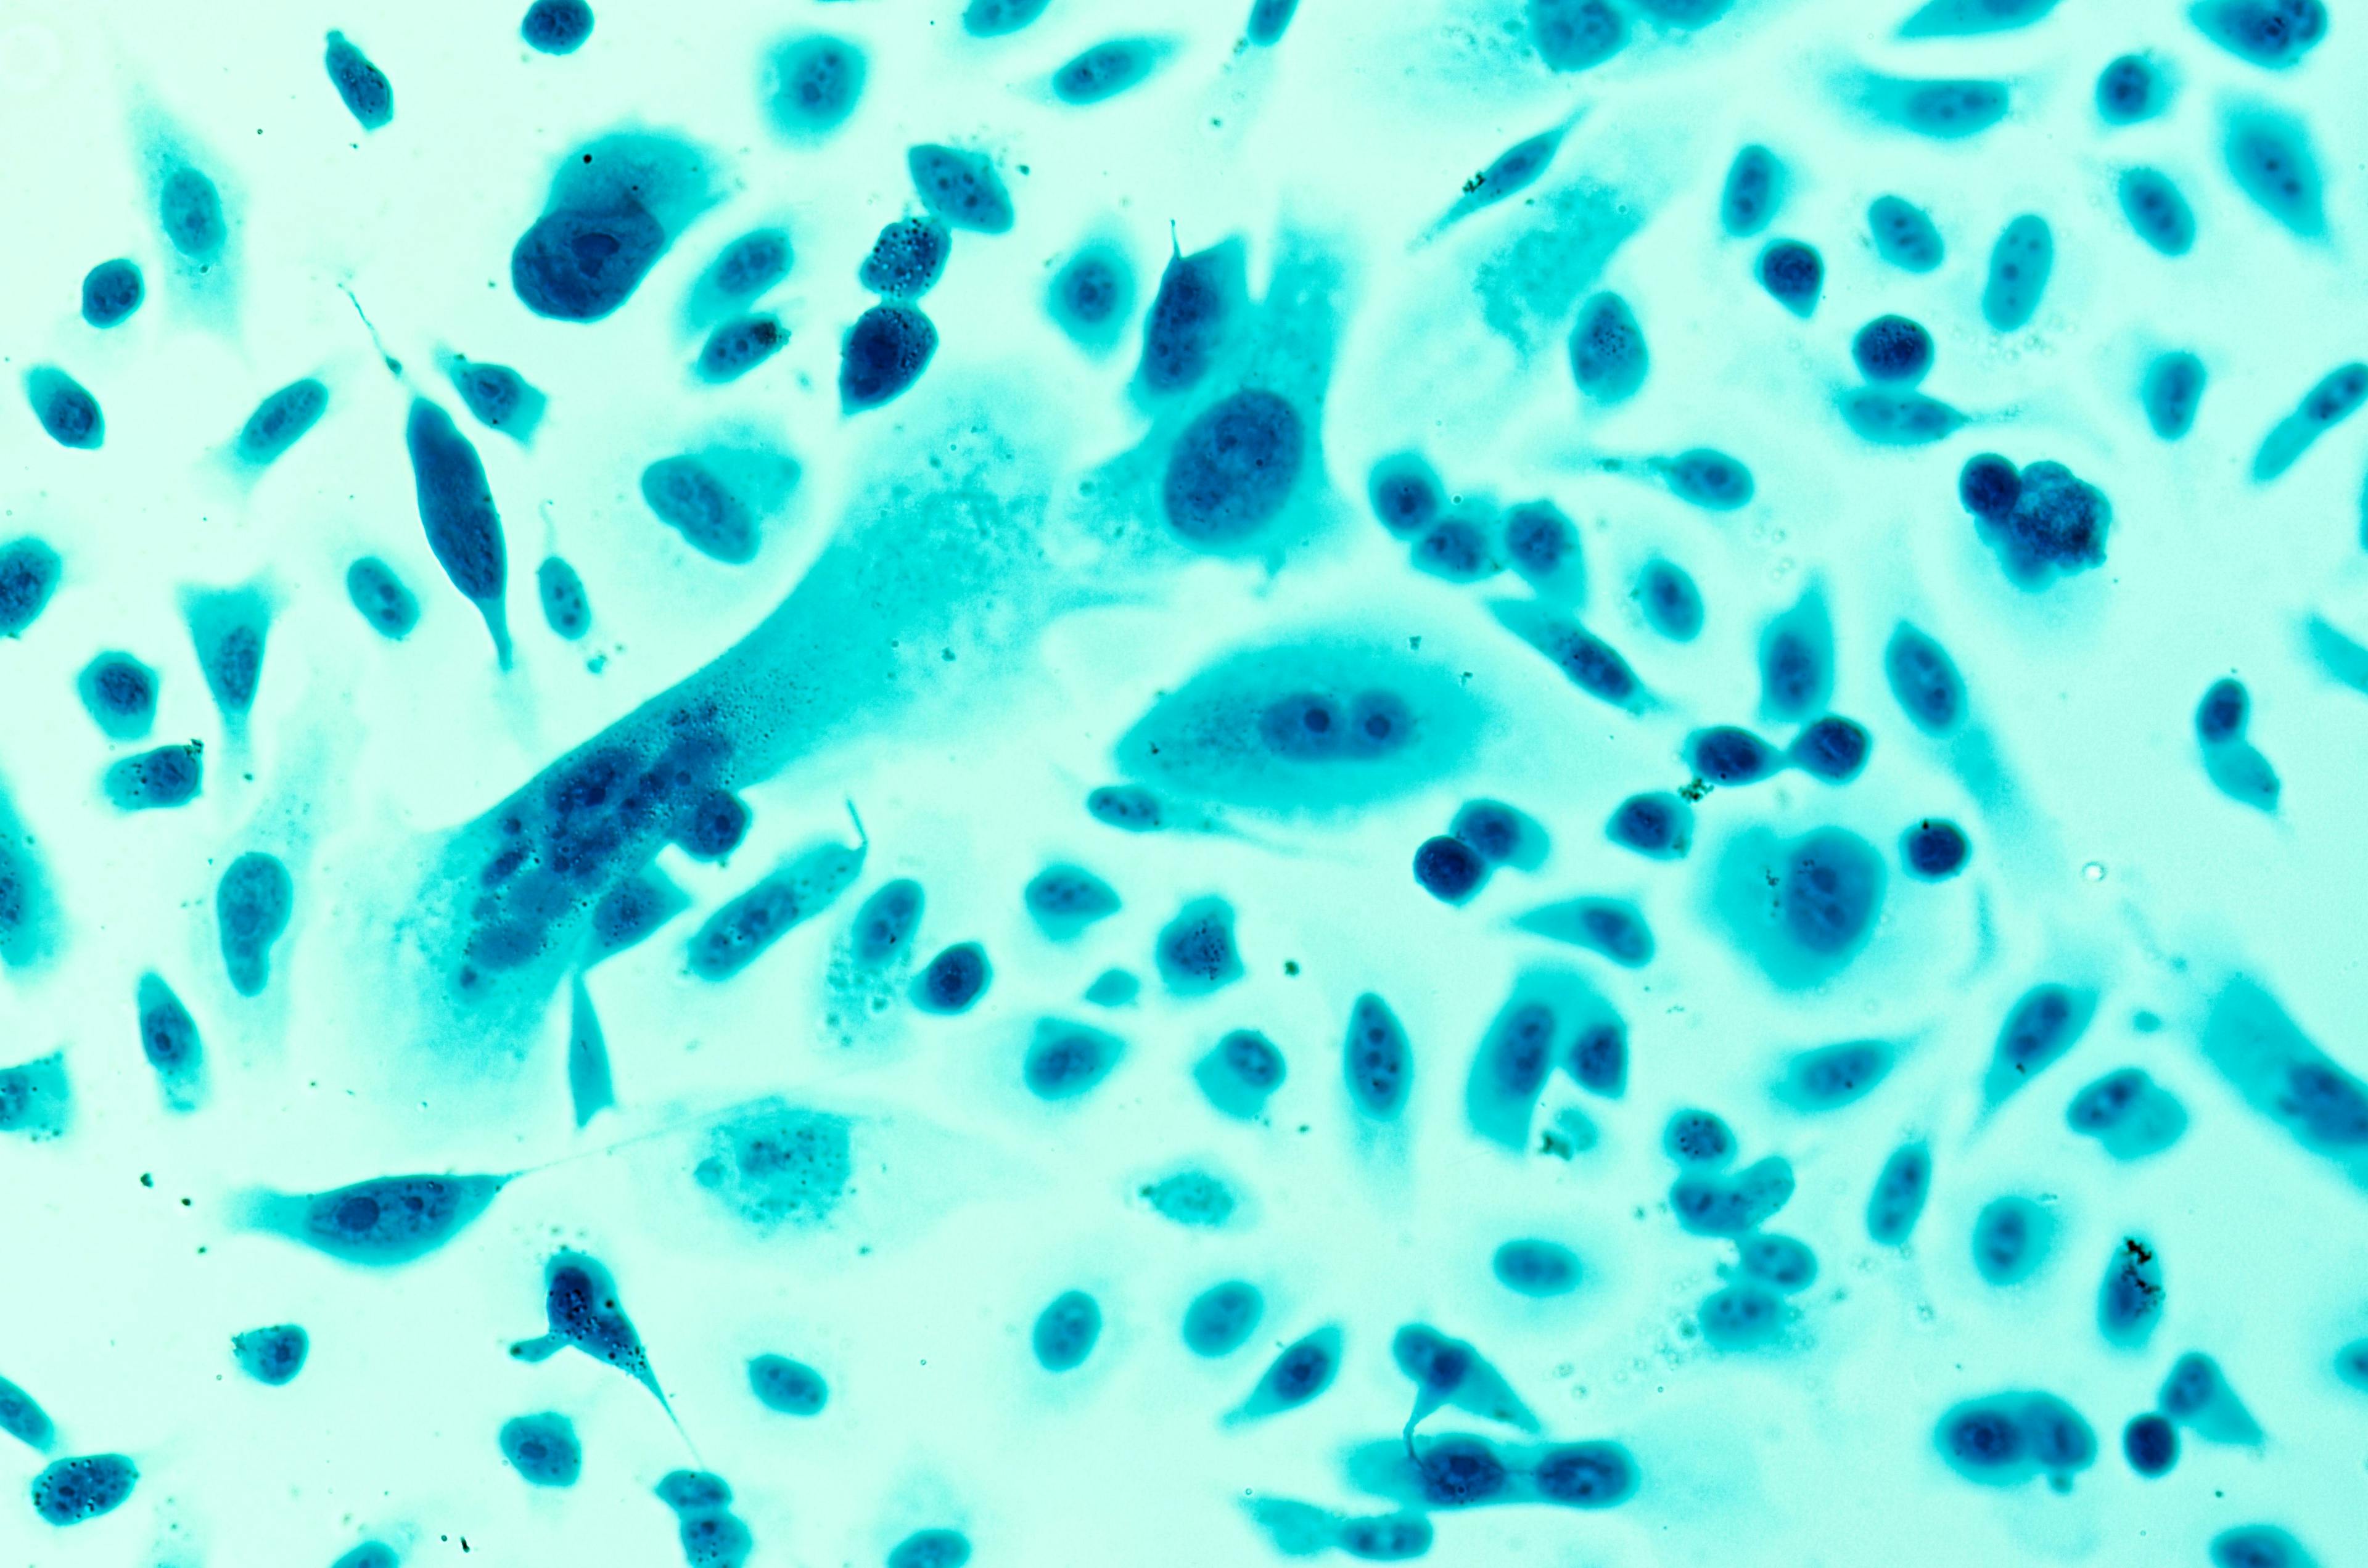 [PC-3 human prostate cancer cells] | Image Credit © [Sheitipaves] - [Adobe Stock]